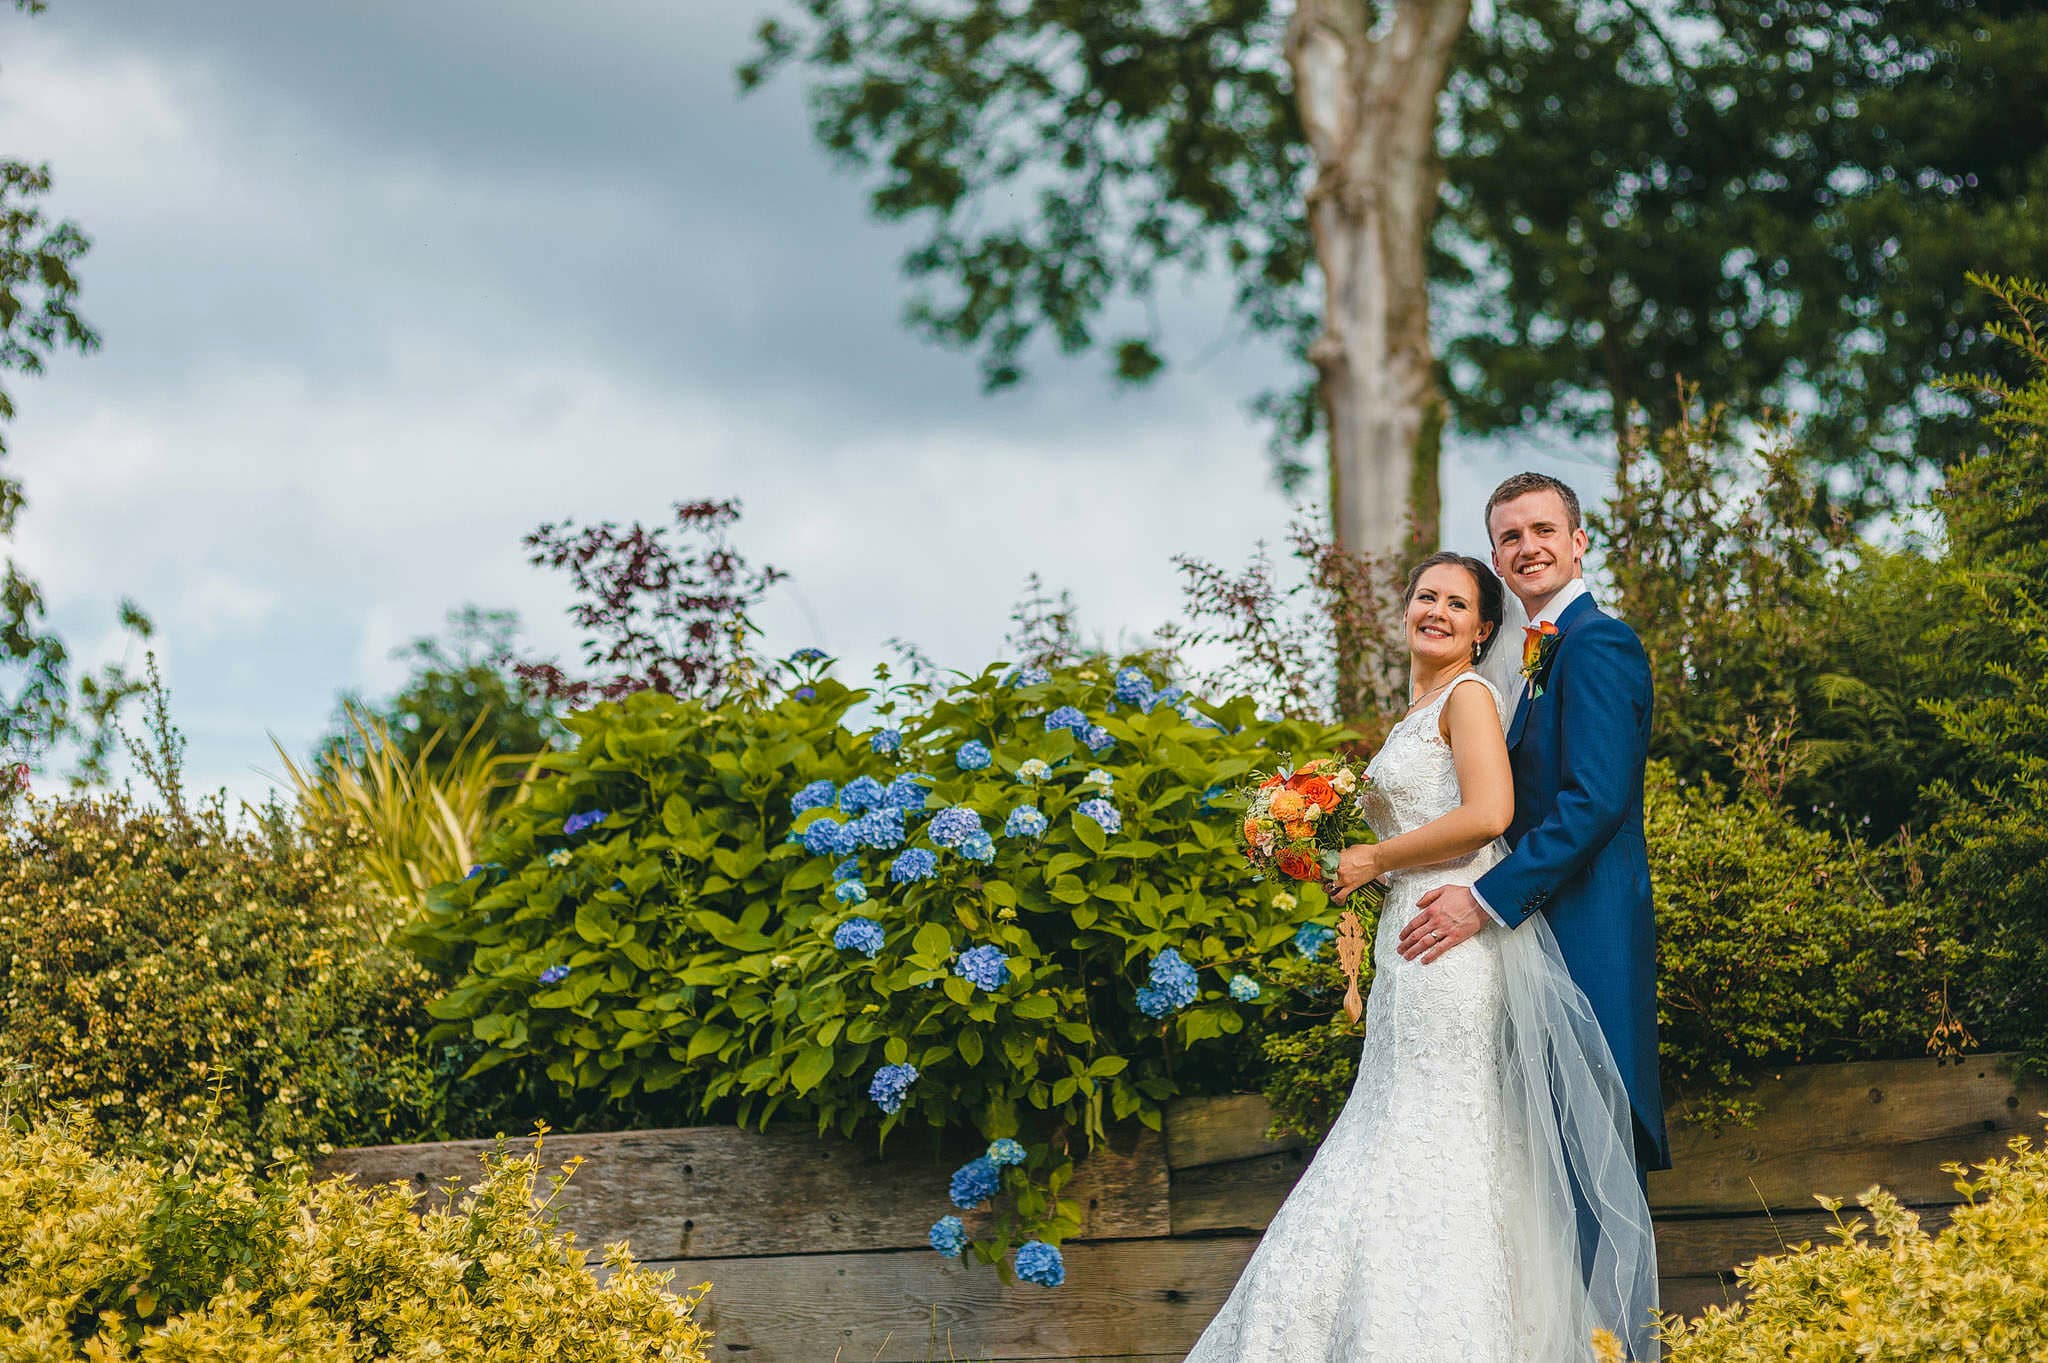 Midlands wedding photography - 2015 Review 46